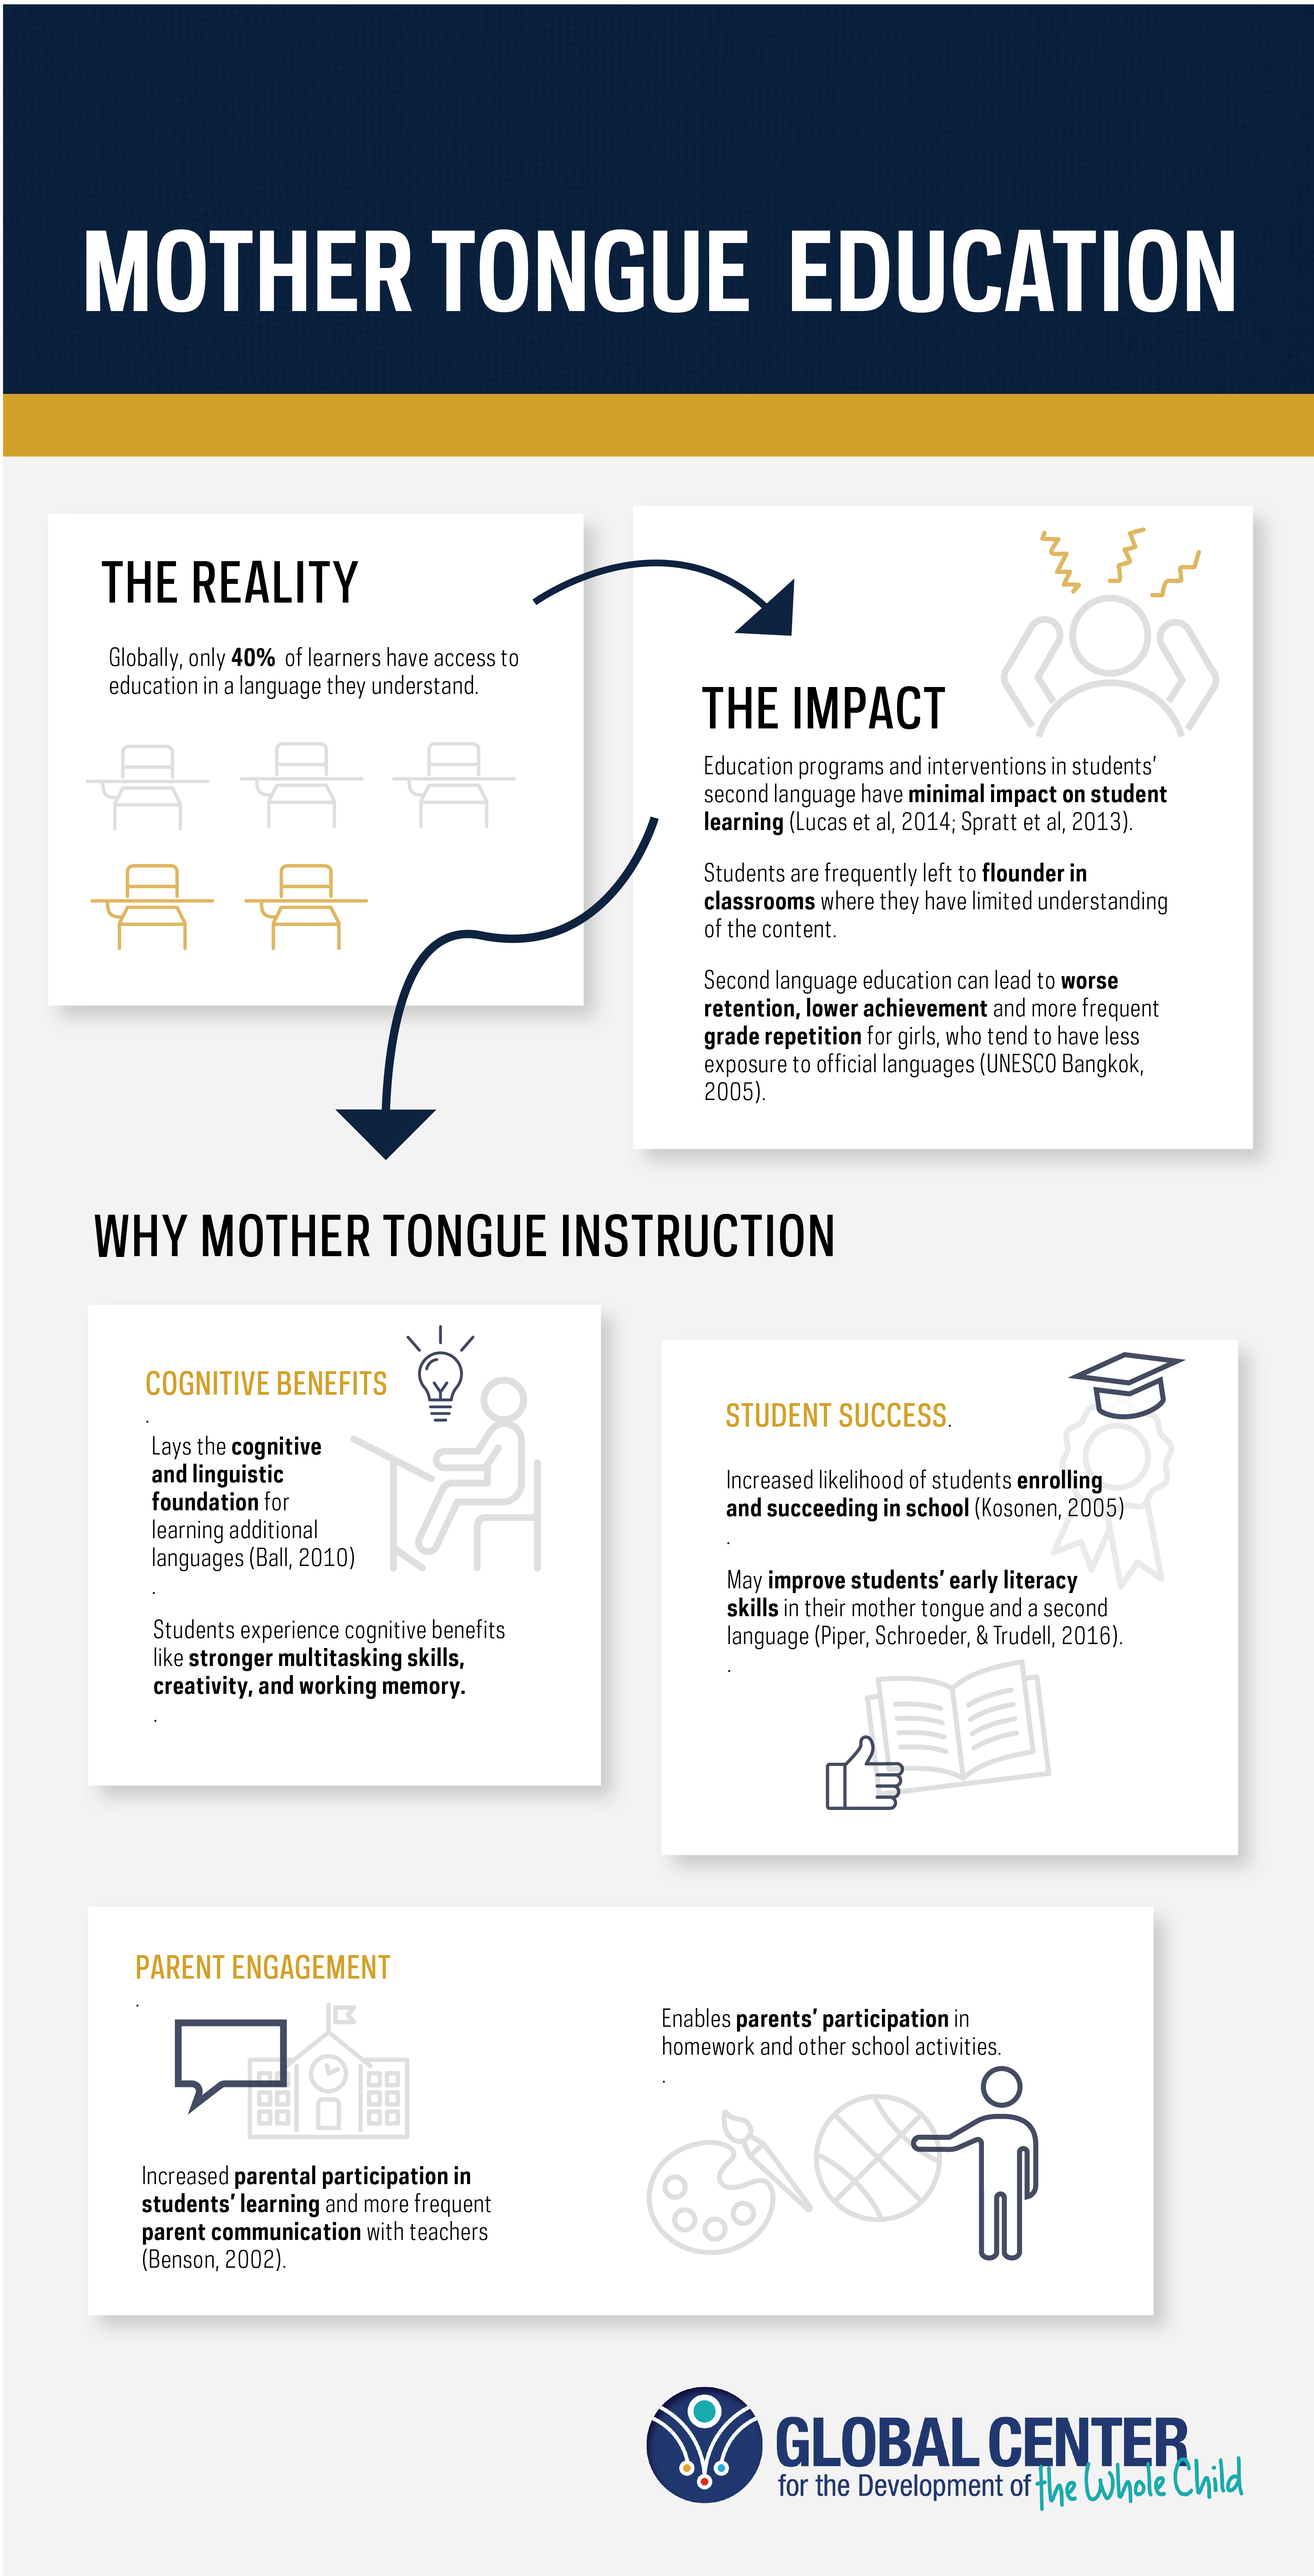 Infographic in gold and blue describing the impact of mother tongue educaiton